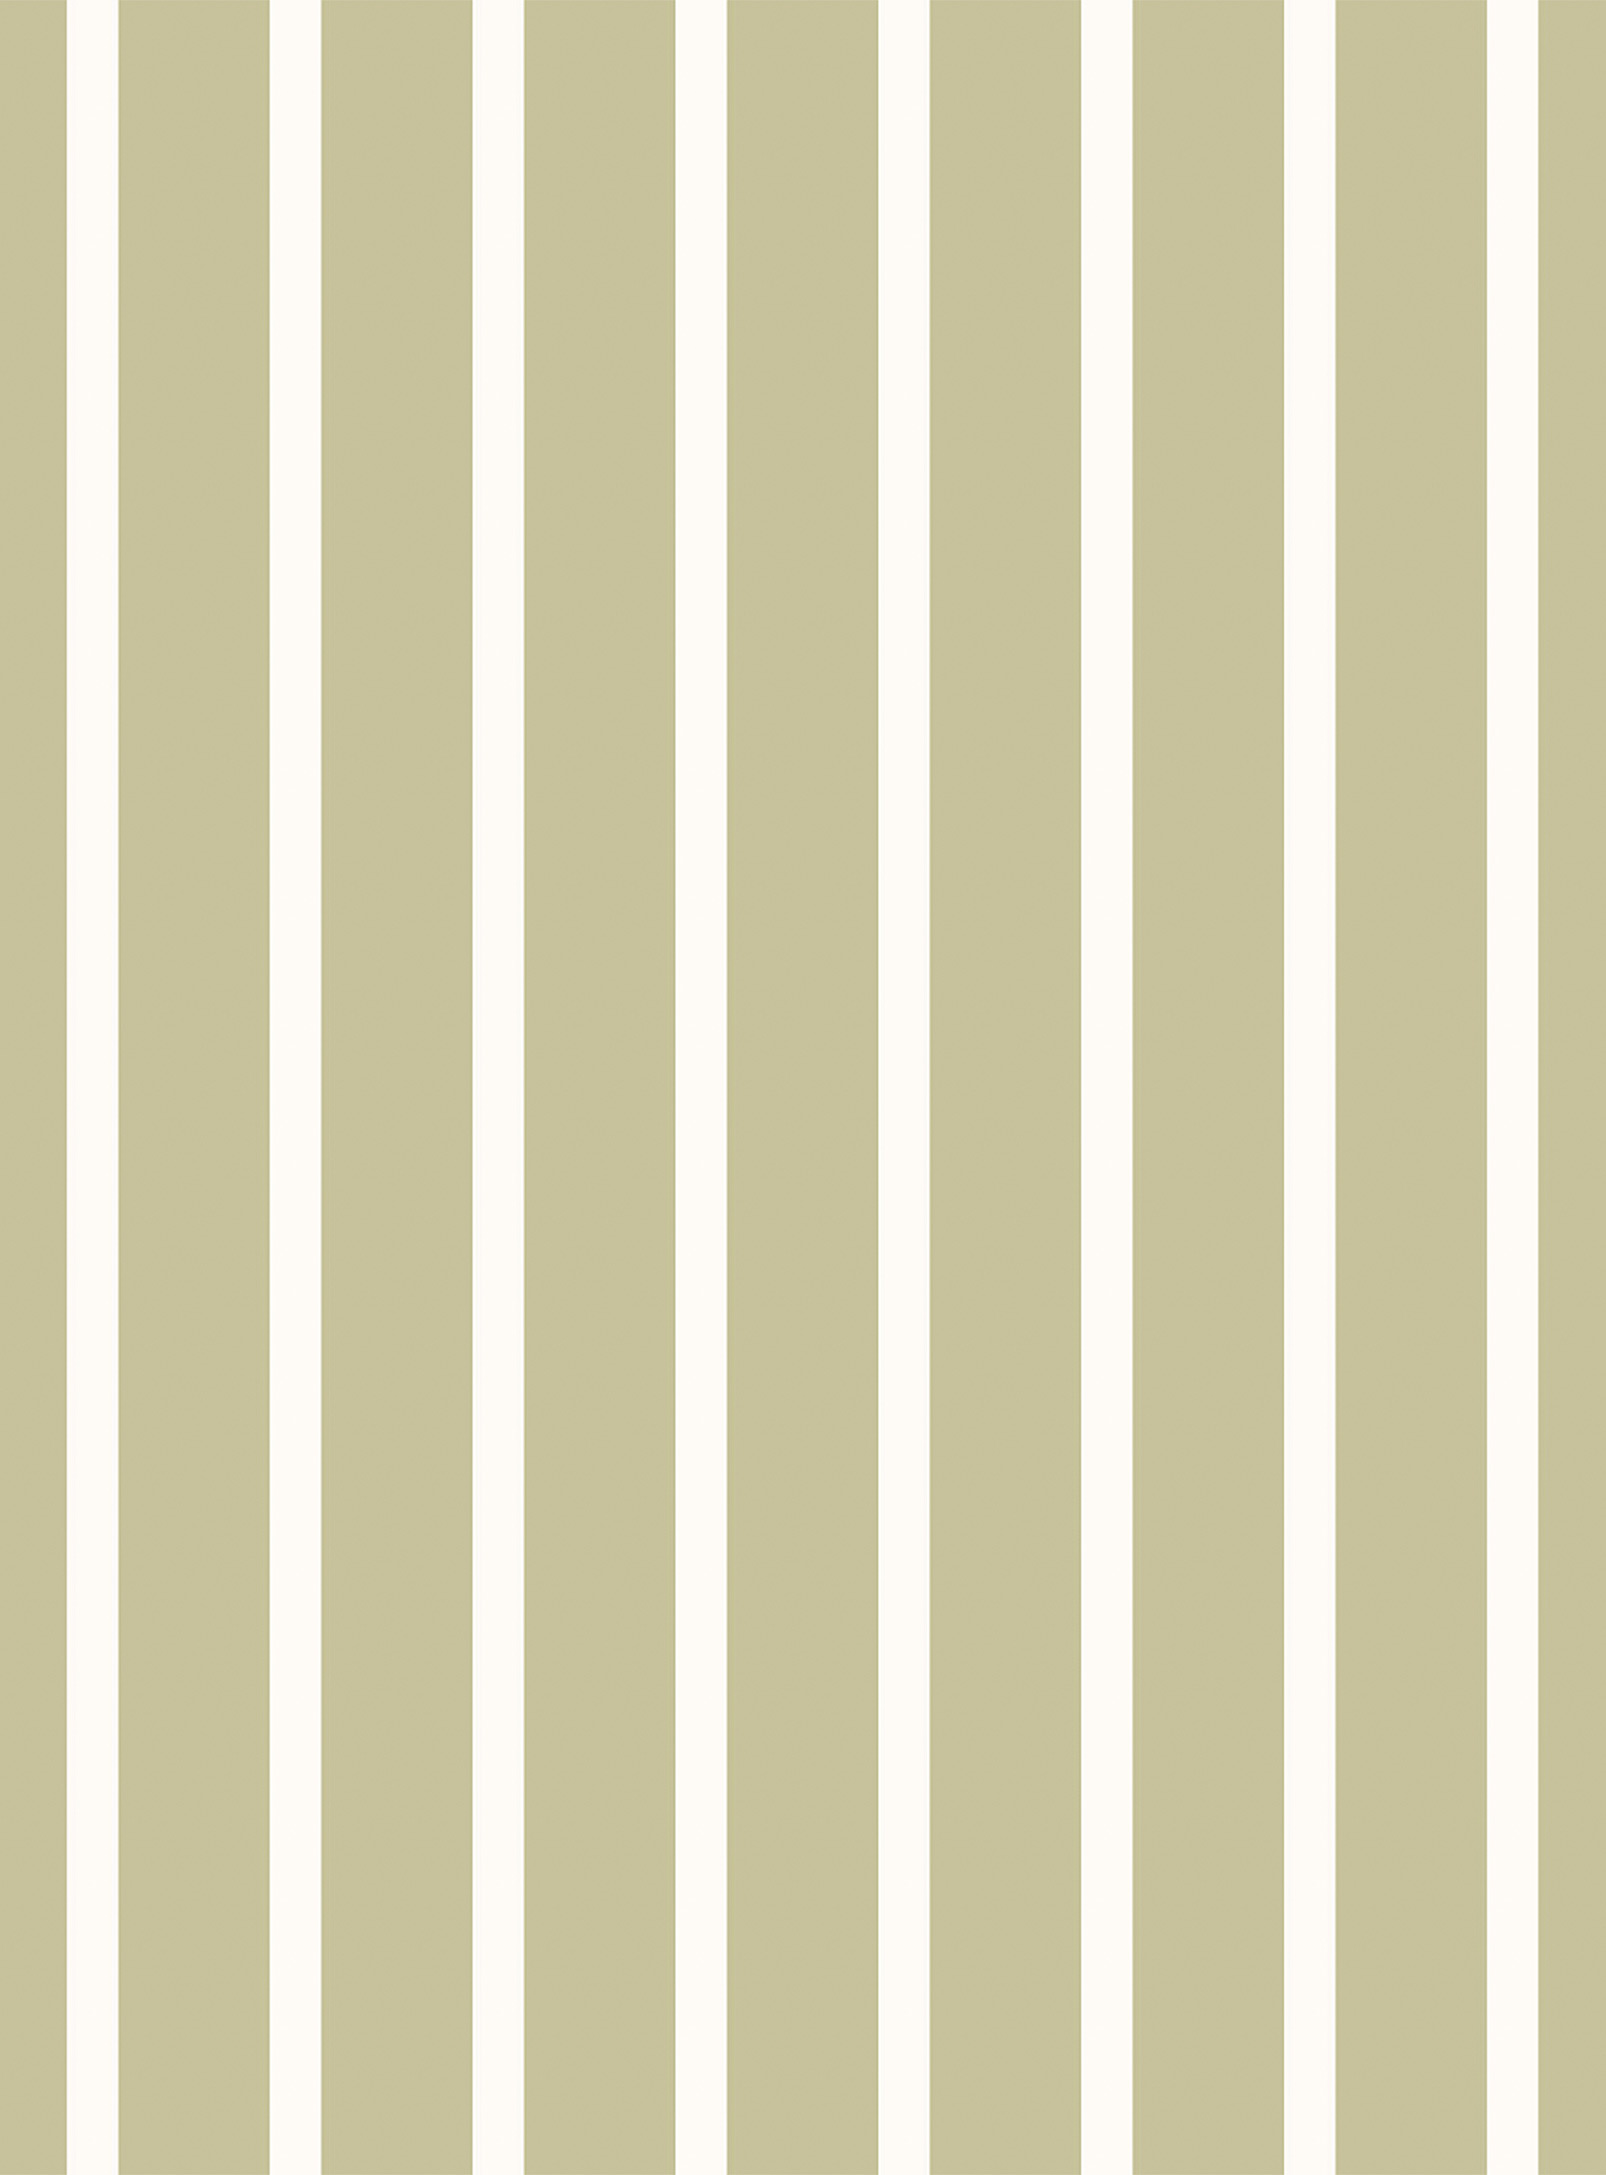 Station D Gelato Striped Wallpaper Strip See Available Sizes In Bottle Green